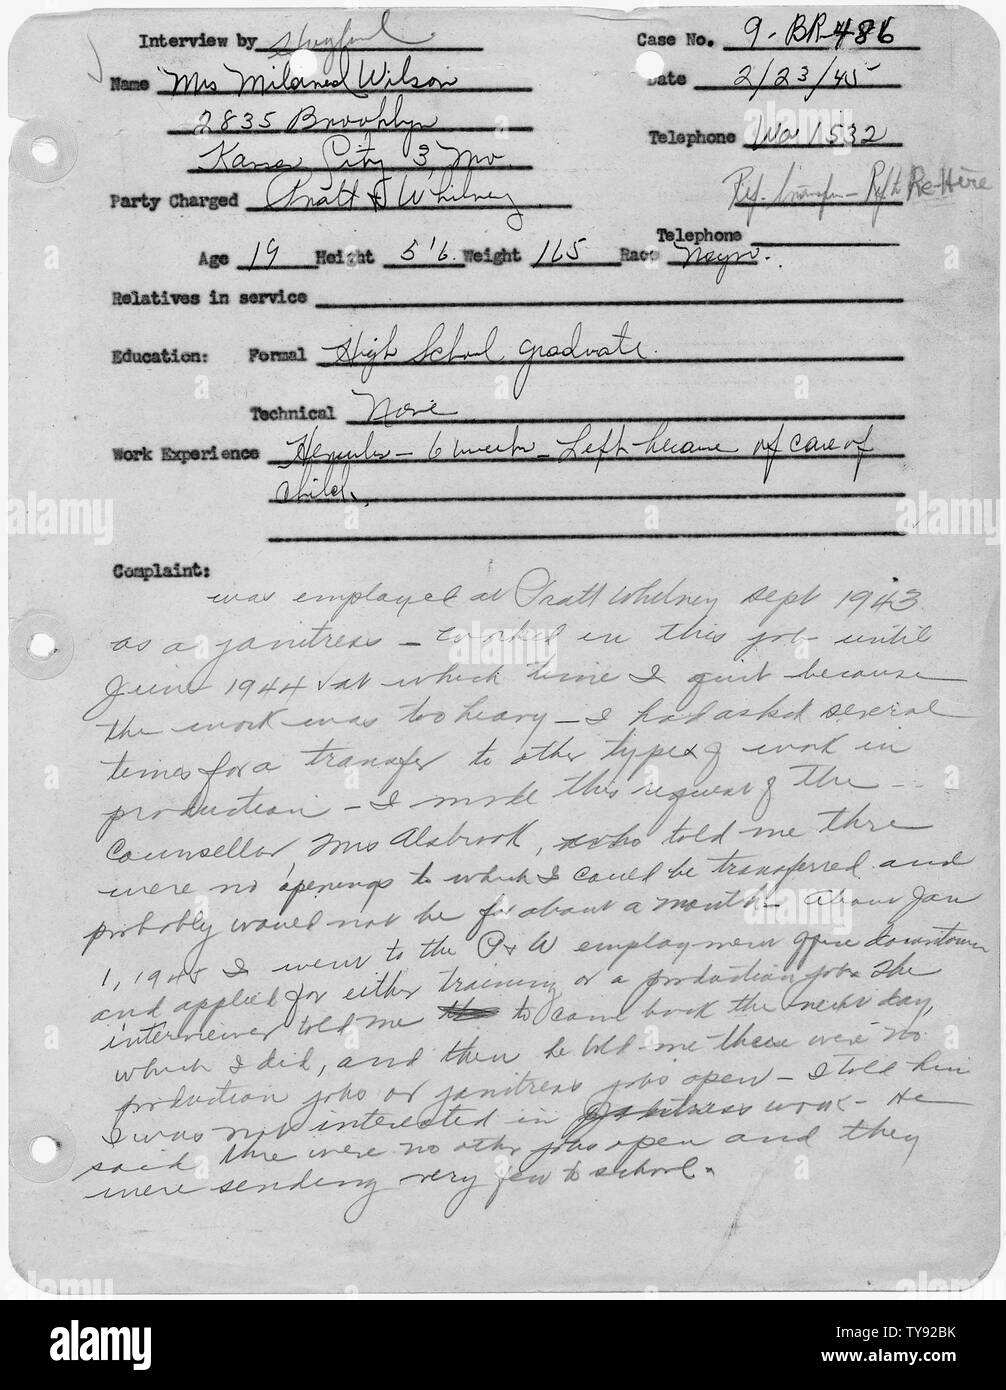 Mildred Wilson [Case 9-BR-486]: Complaint Interview; Scope and content:  Notes from interview of the complainant. Stock Photo